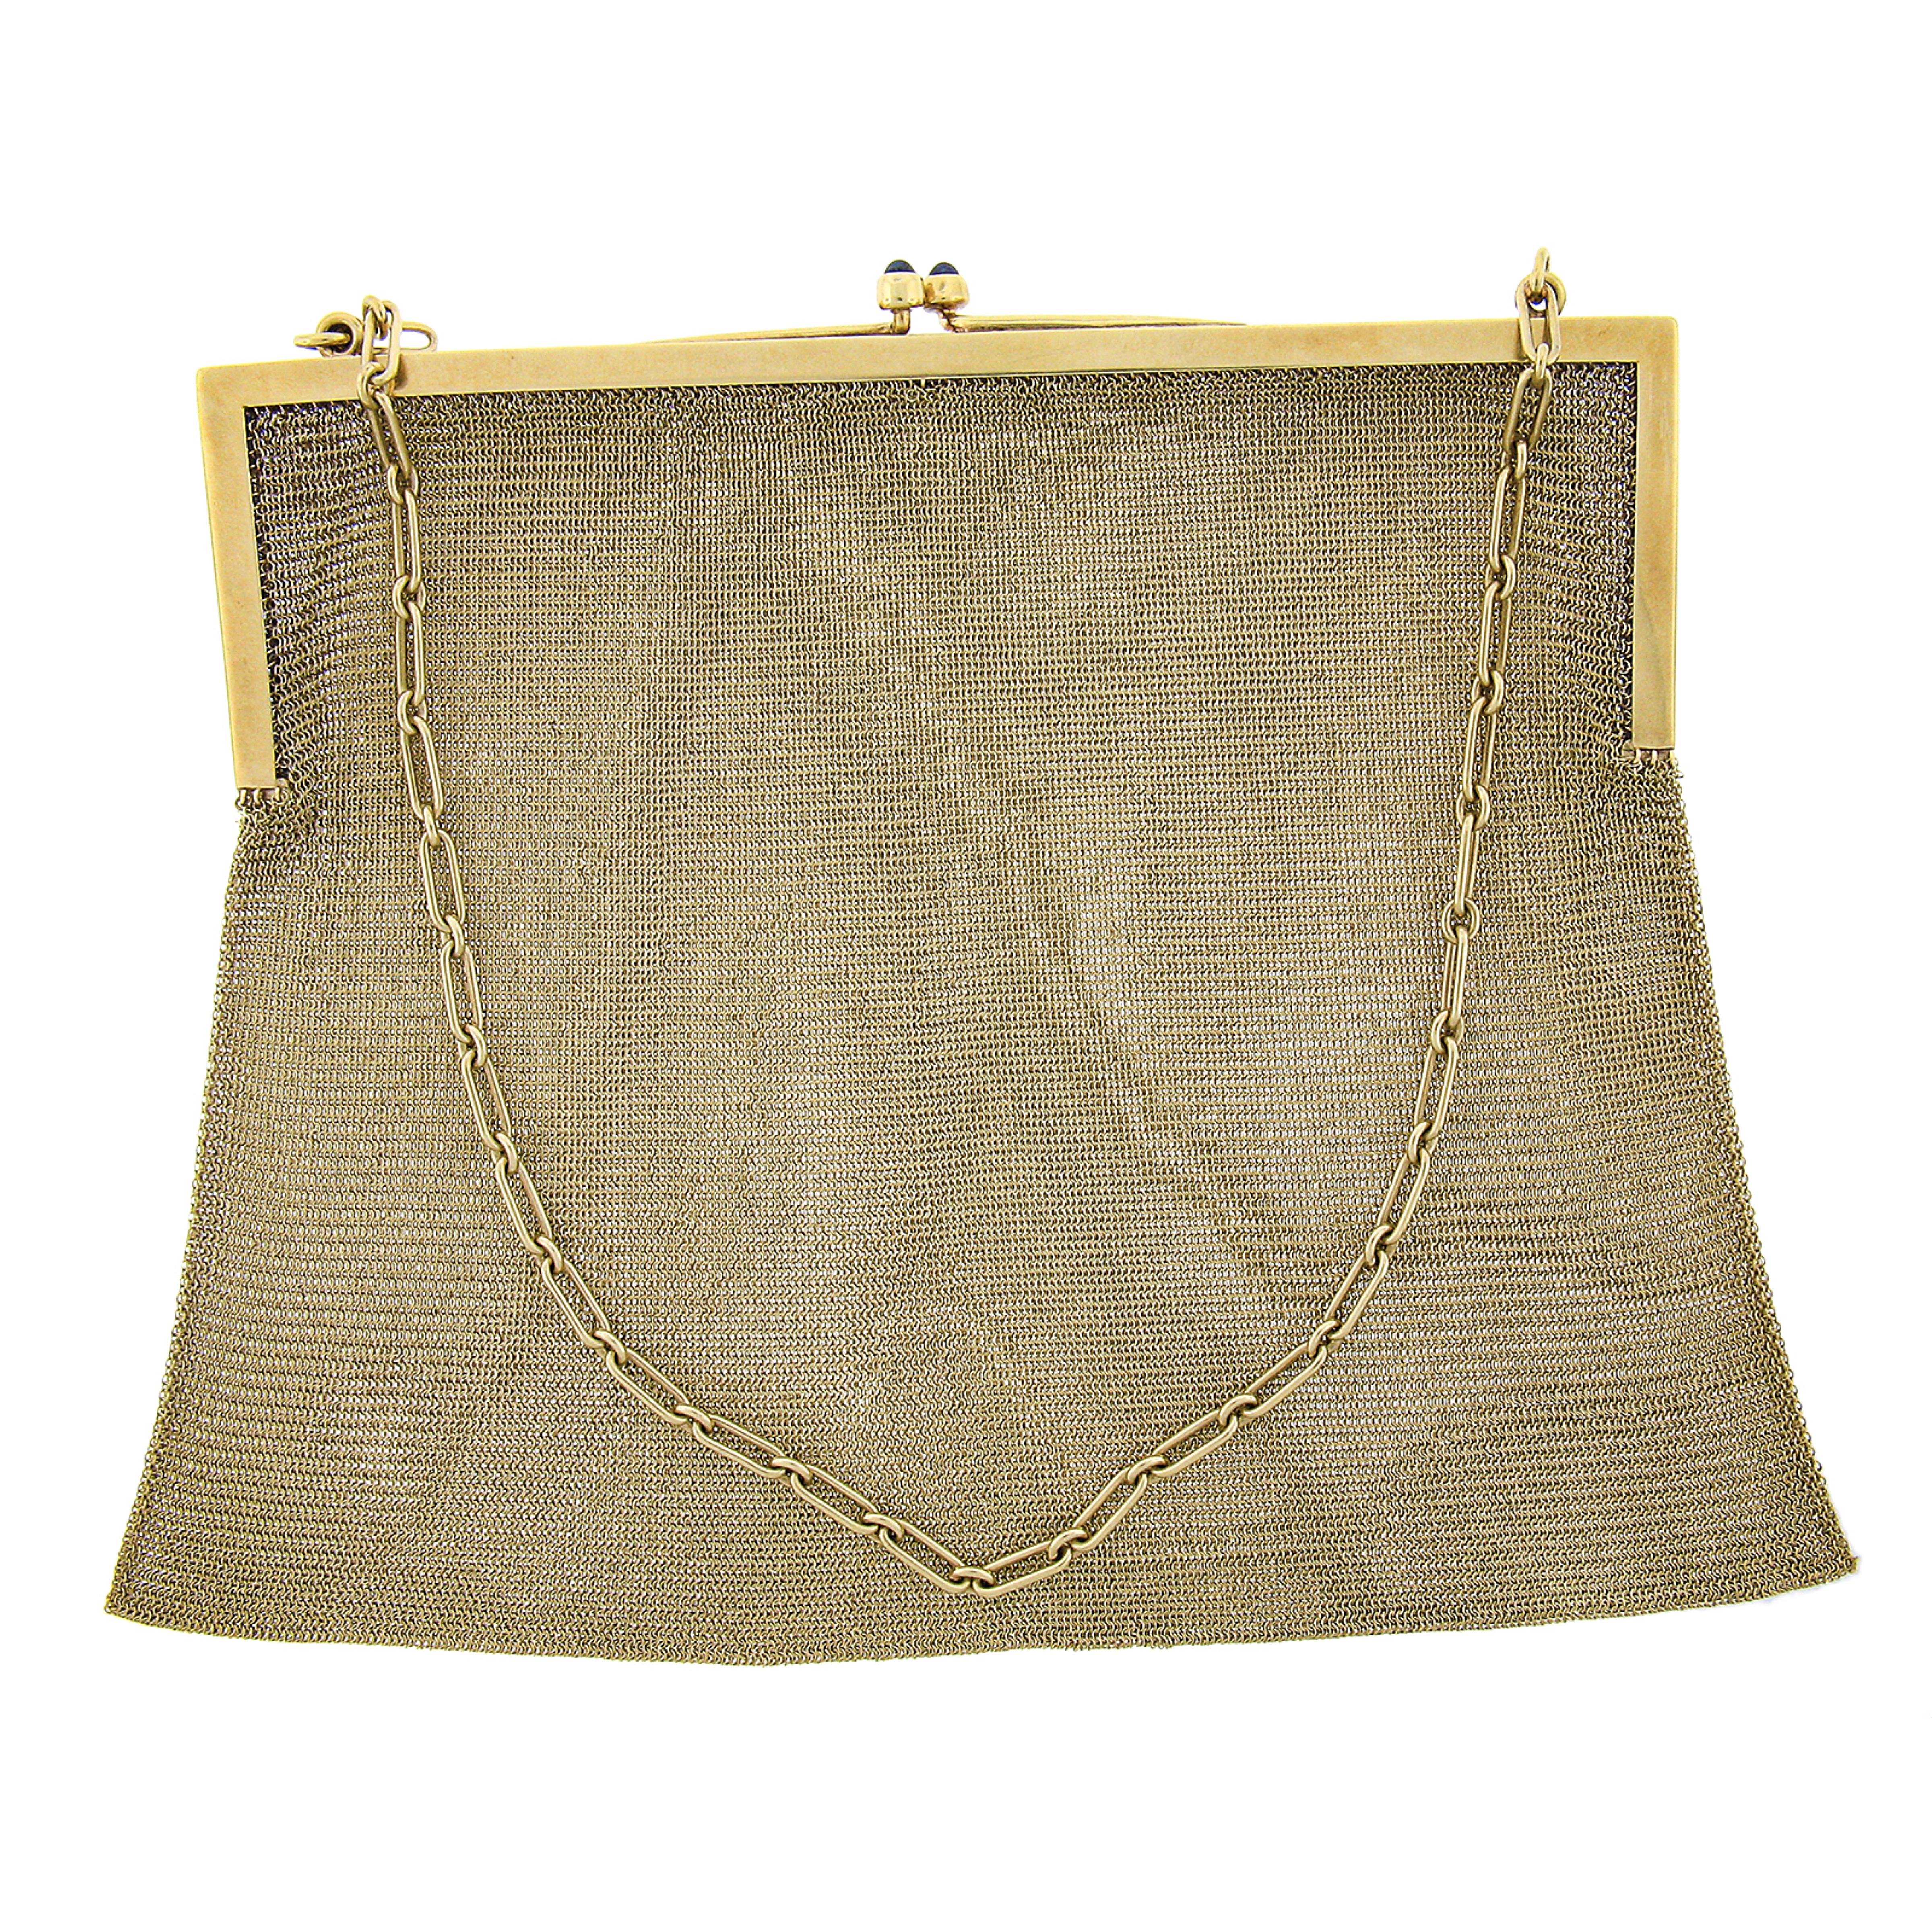 This incredibly designed, antique, flexible mesh purse was crafted during the art deco period from solid 14k yellow gold. This fine piece is designed by Dreicer & Co. and features a stunning sapphire and diamond lined top that adds a truly glamorous